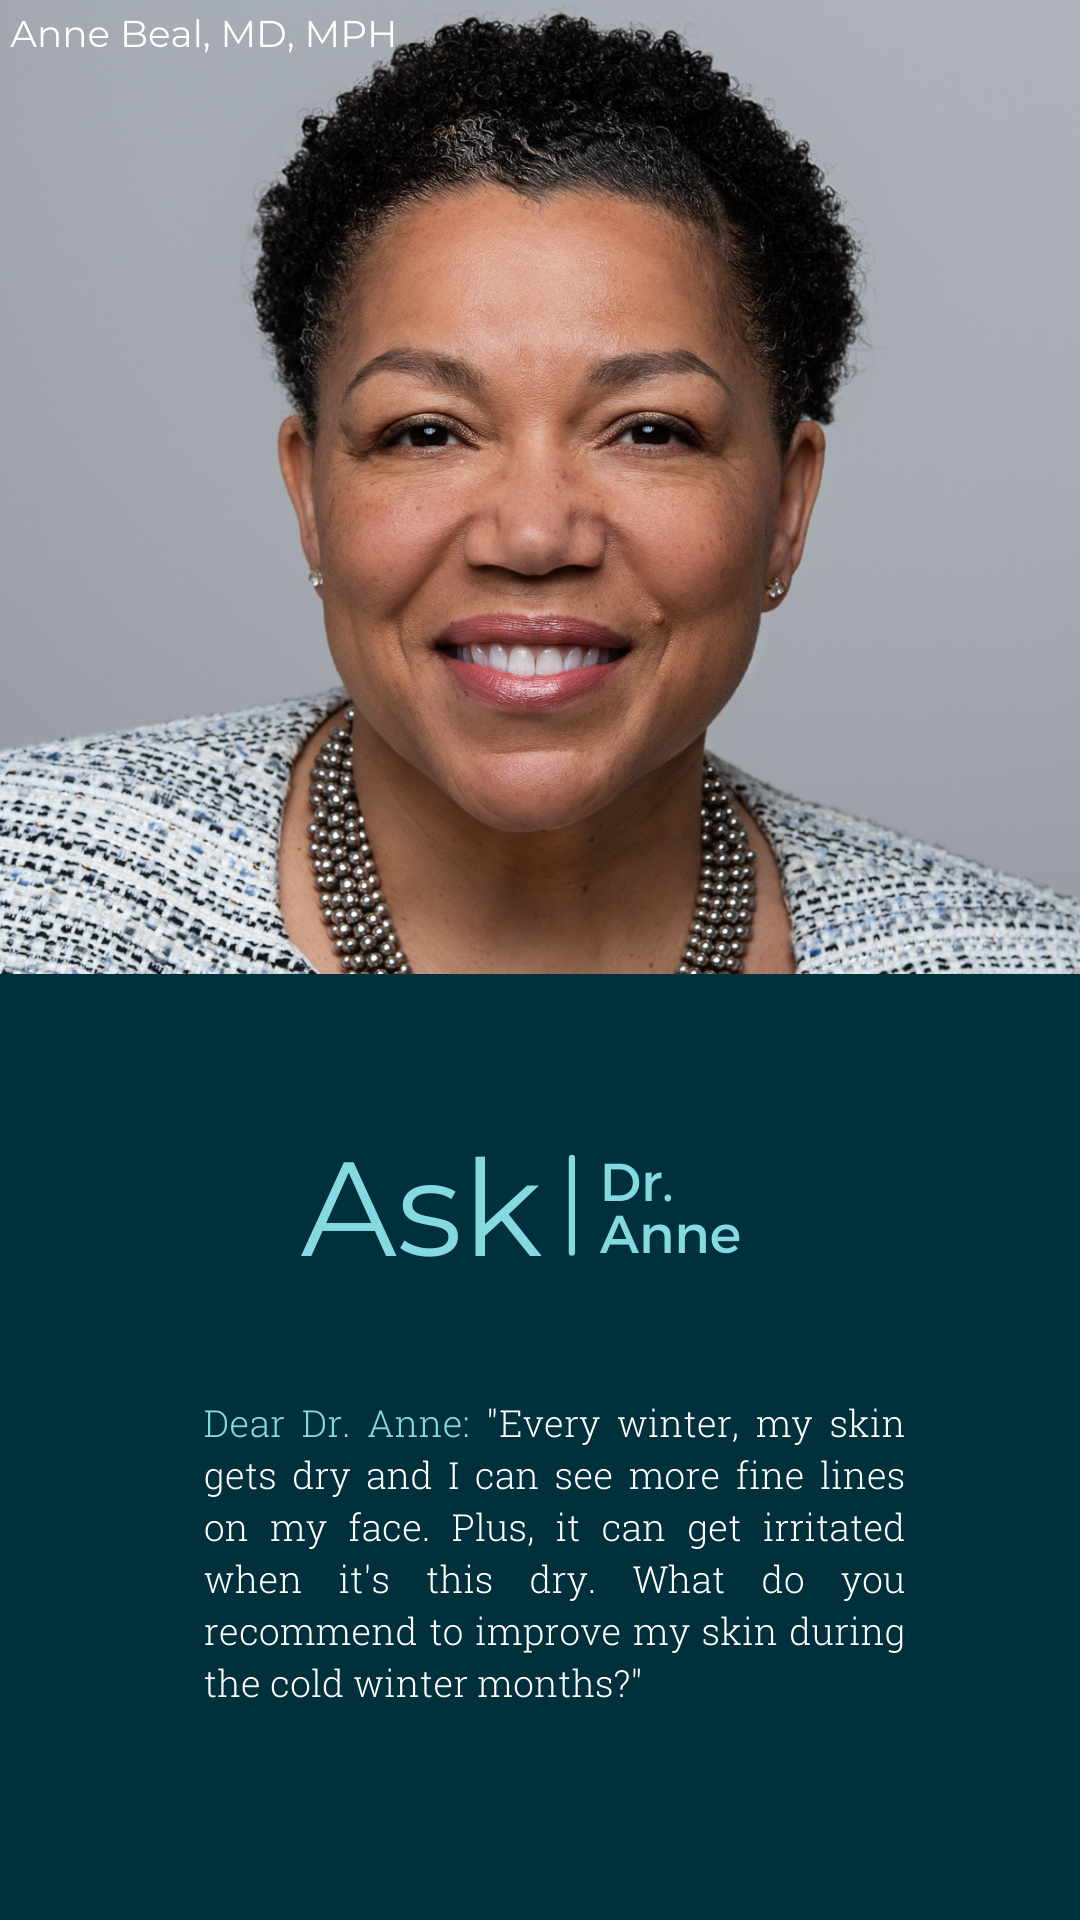 Caring for Dry Winter Skin